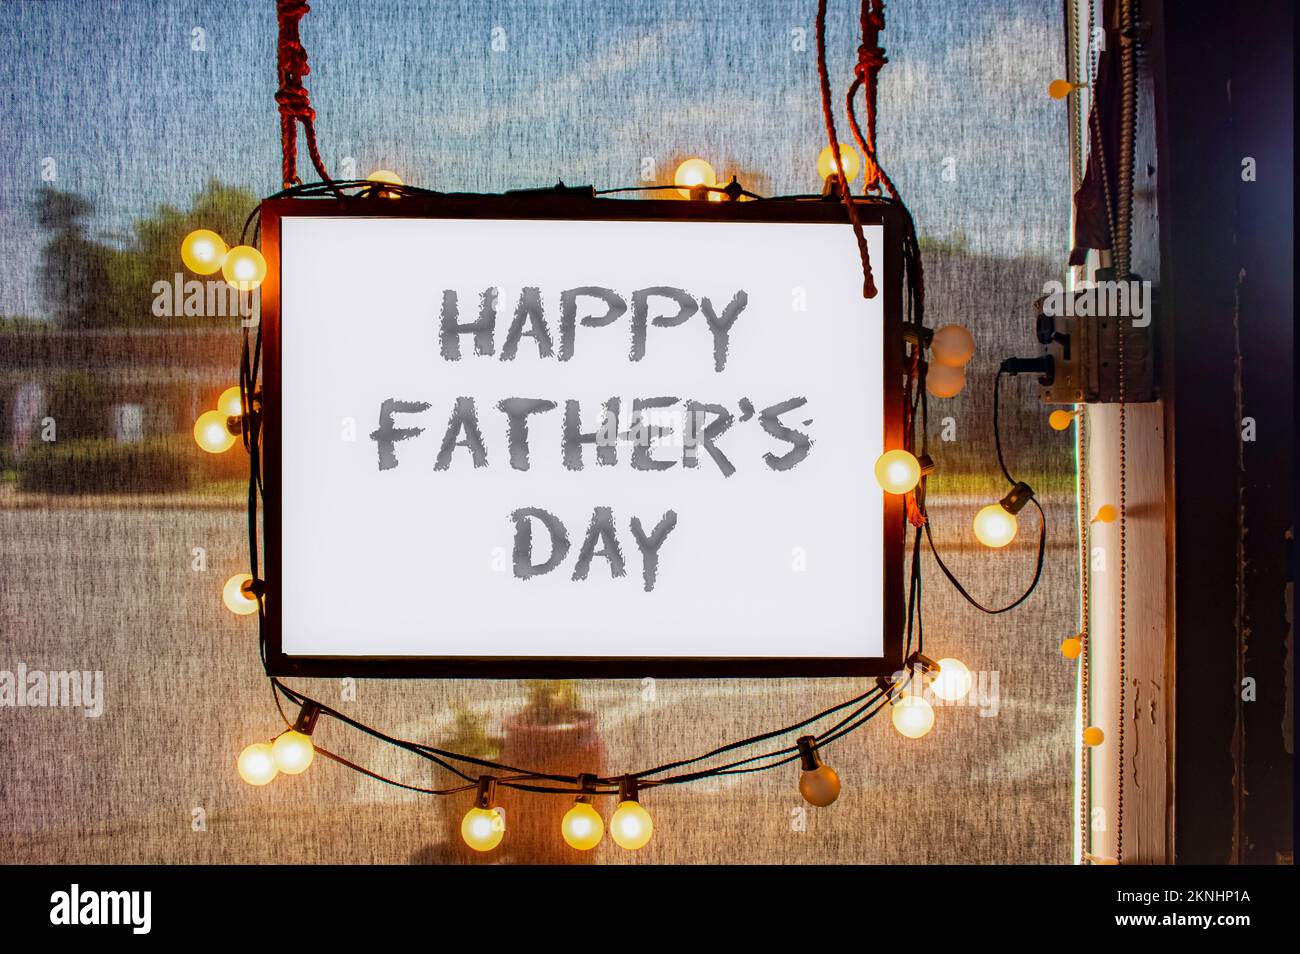 Happy Fathers Day written on hanging sign surrounded by party lights in shop window with semi-transparent dark solar shades behind and dimly viewed ci Stock Photo